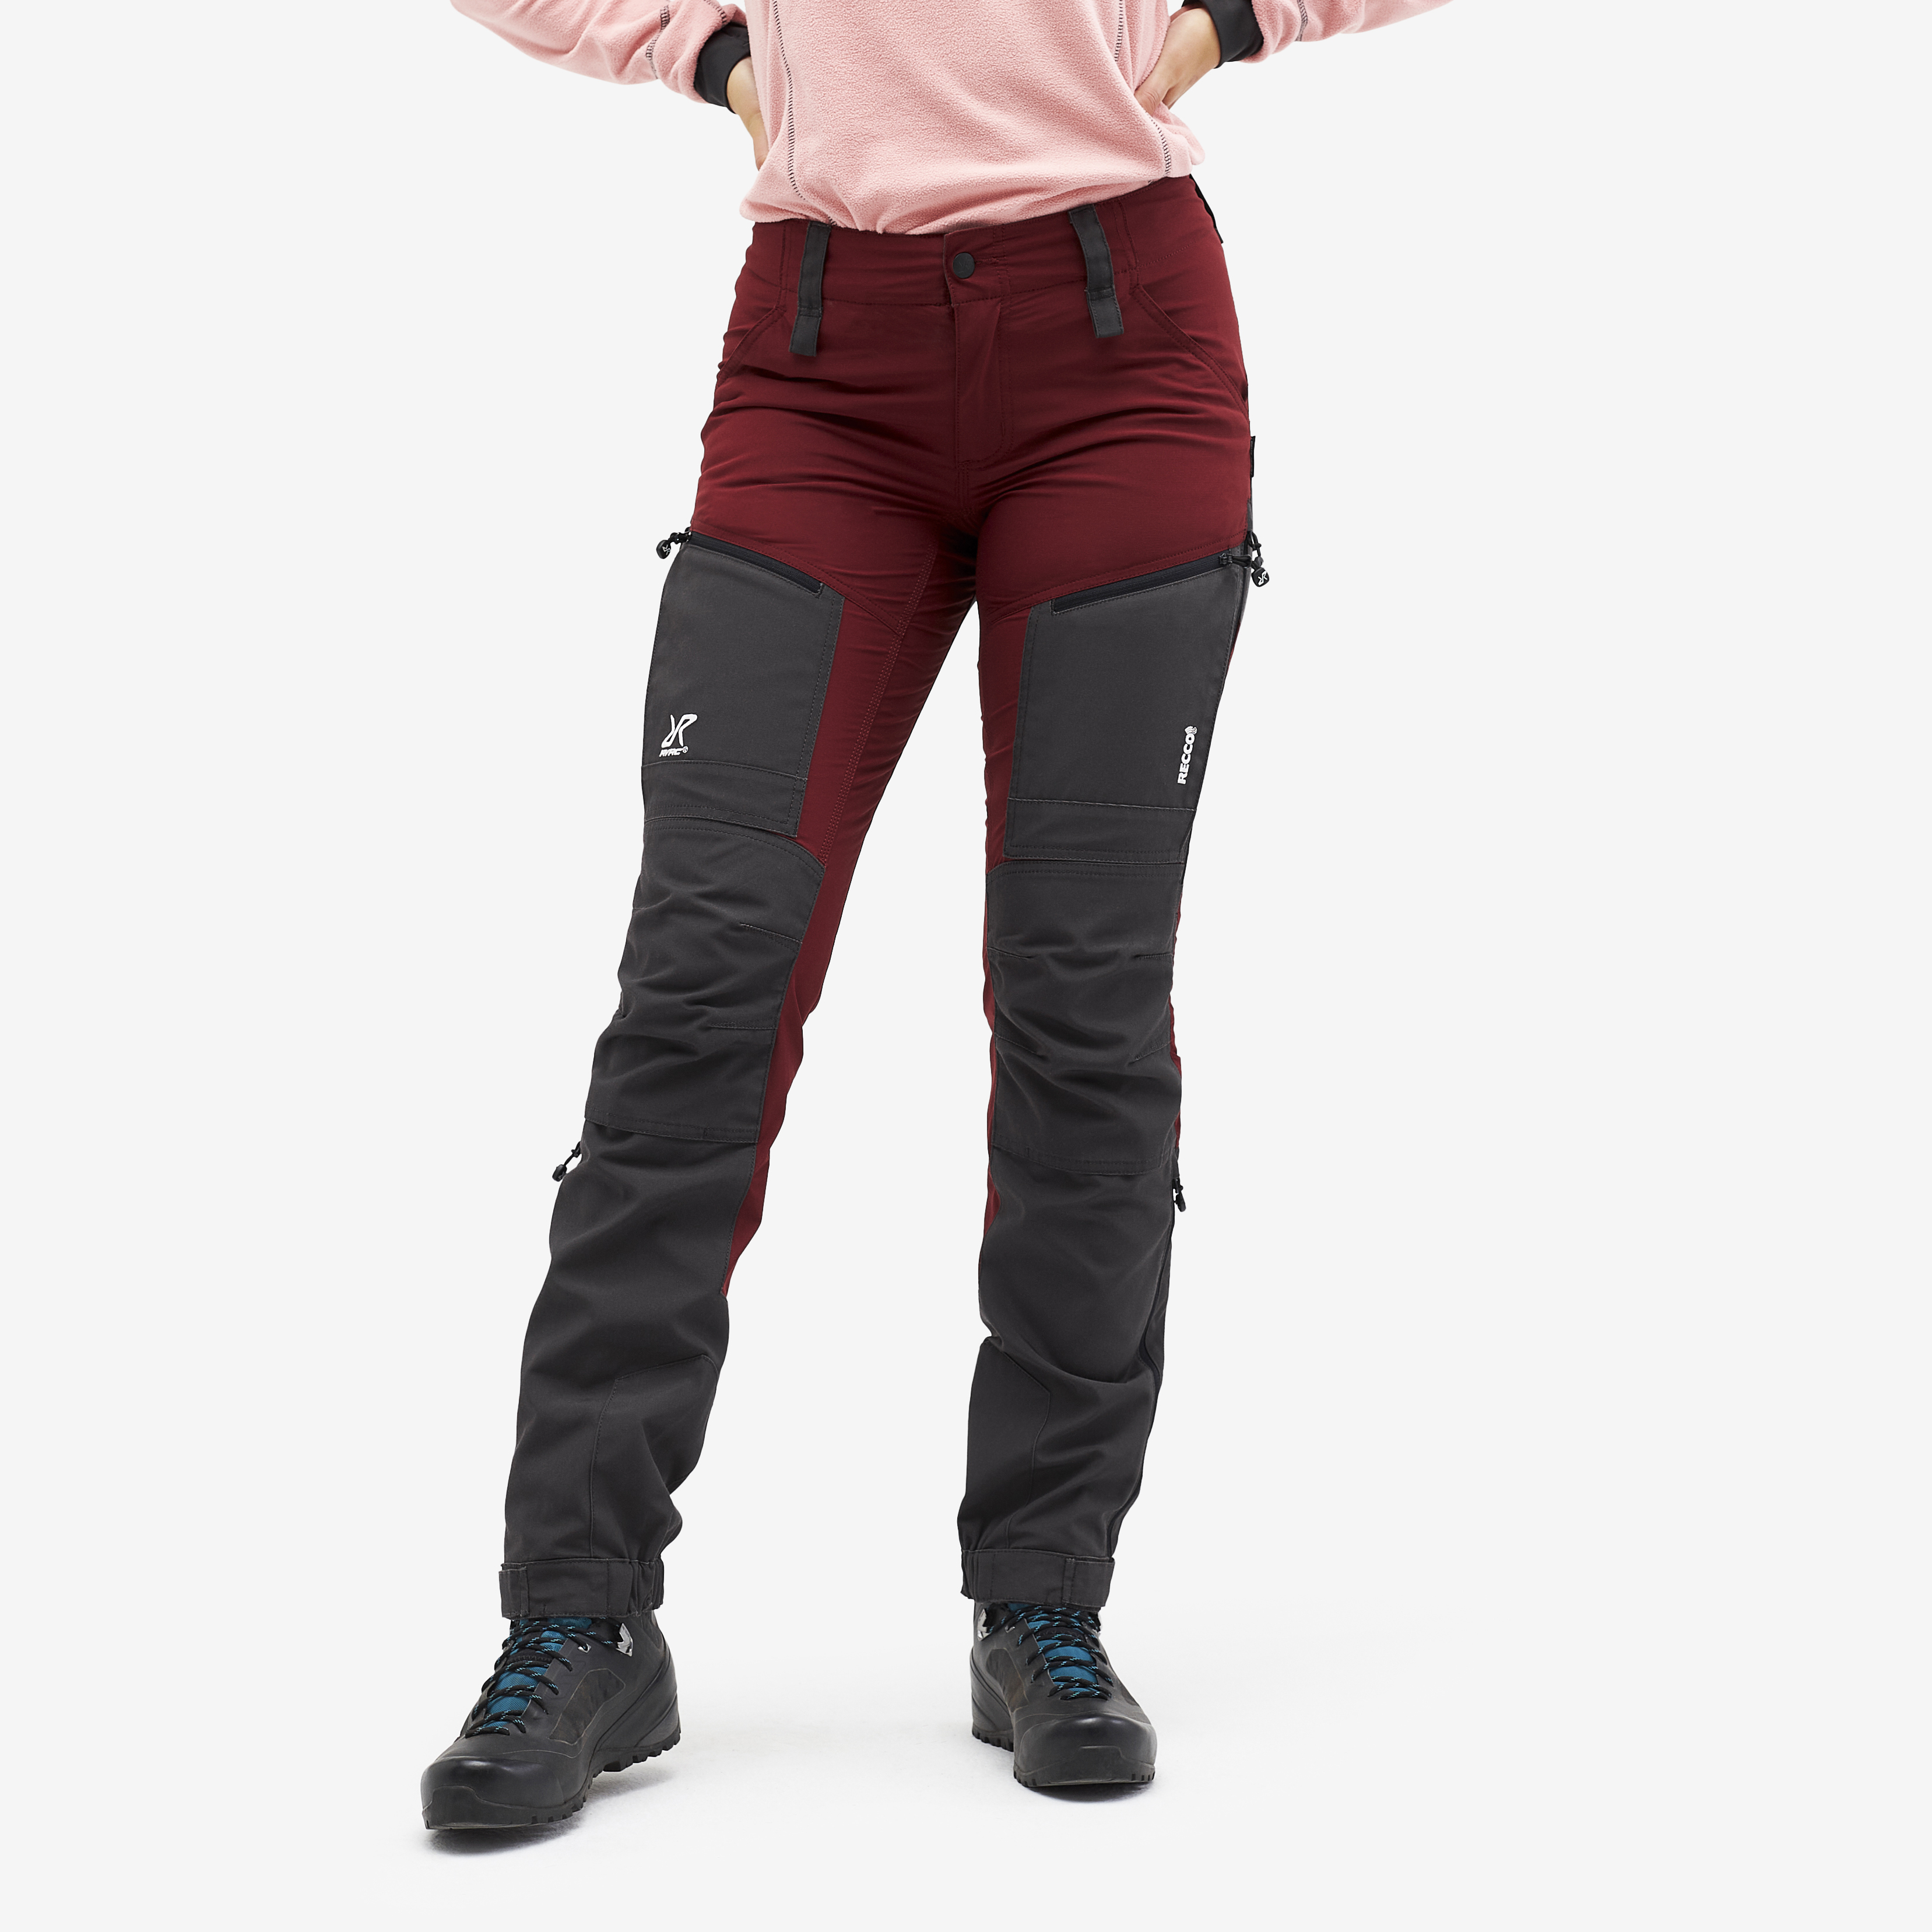 Nordwand outdoor pants for women in dark red